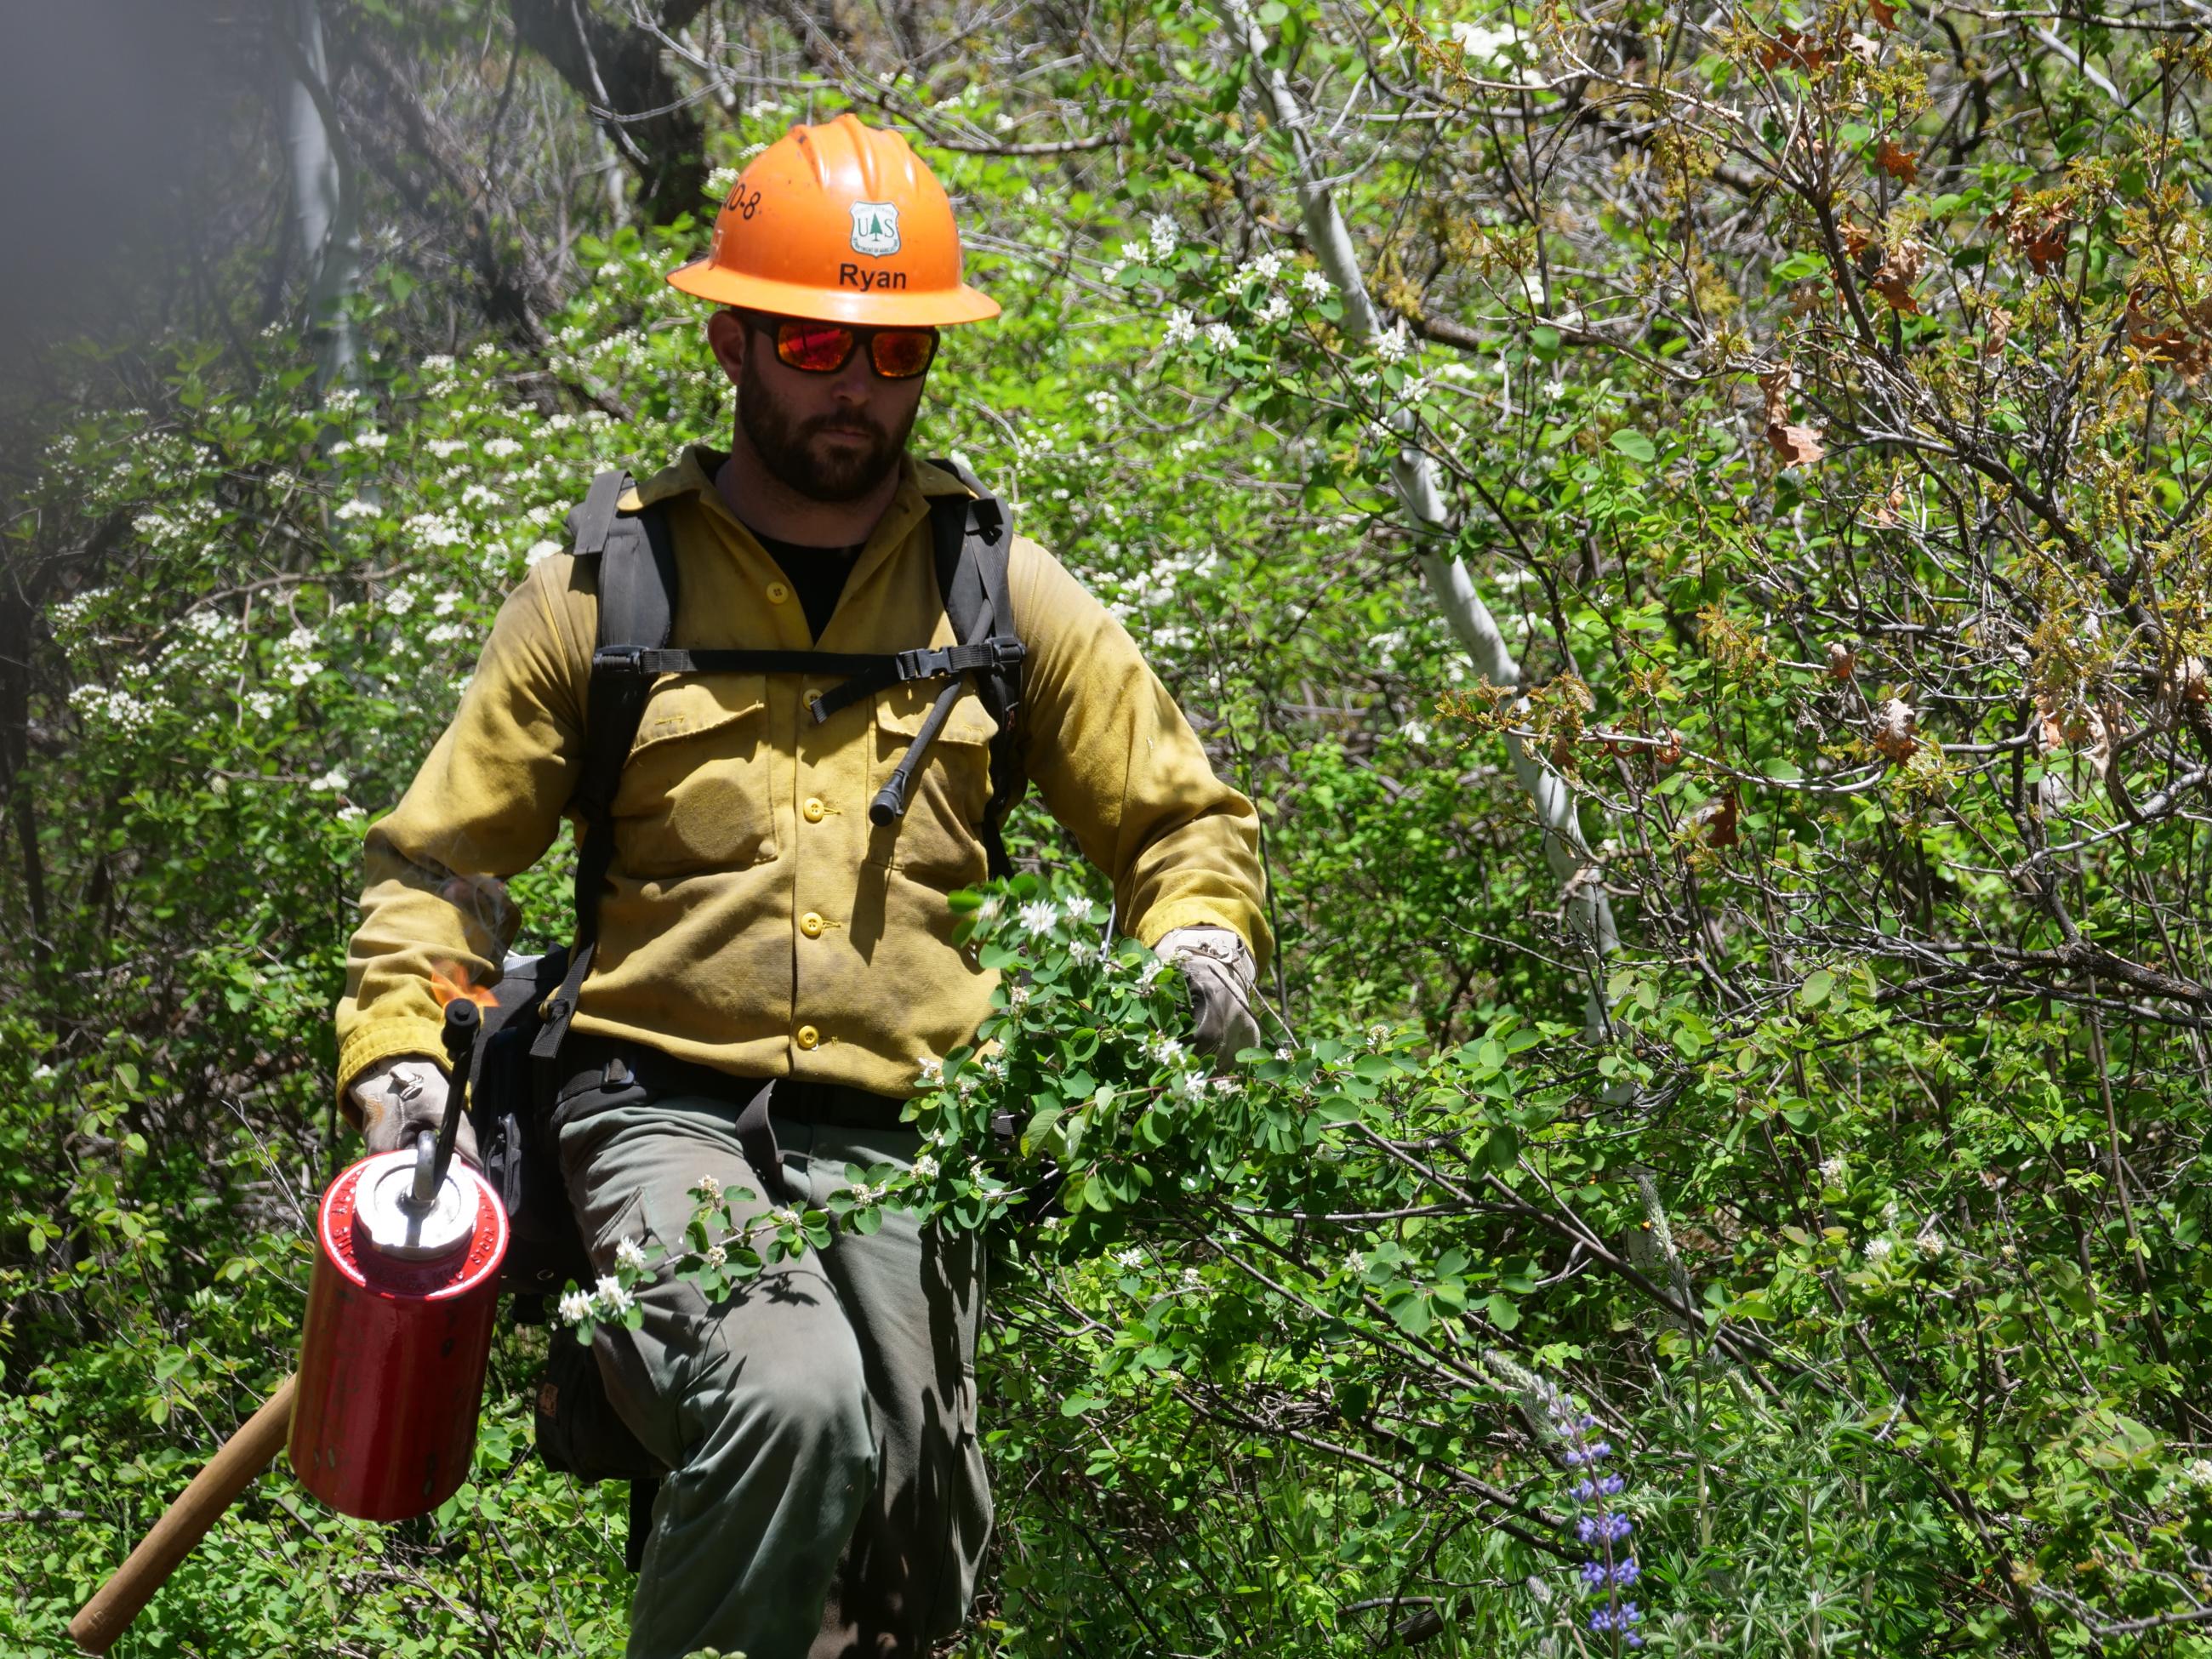 A firefighter with a drip torch and wearing gloves and an orange hard hat is seen walking through a bushy area..